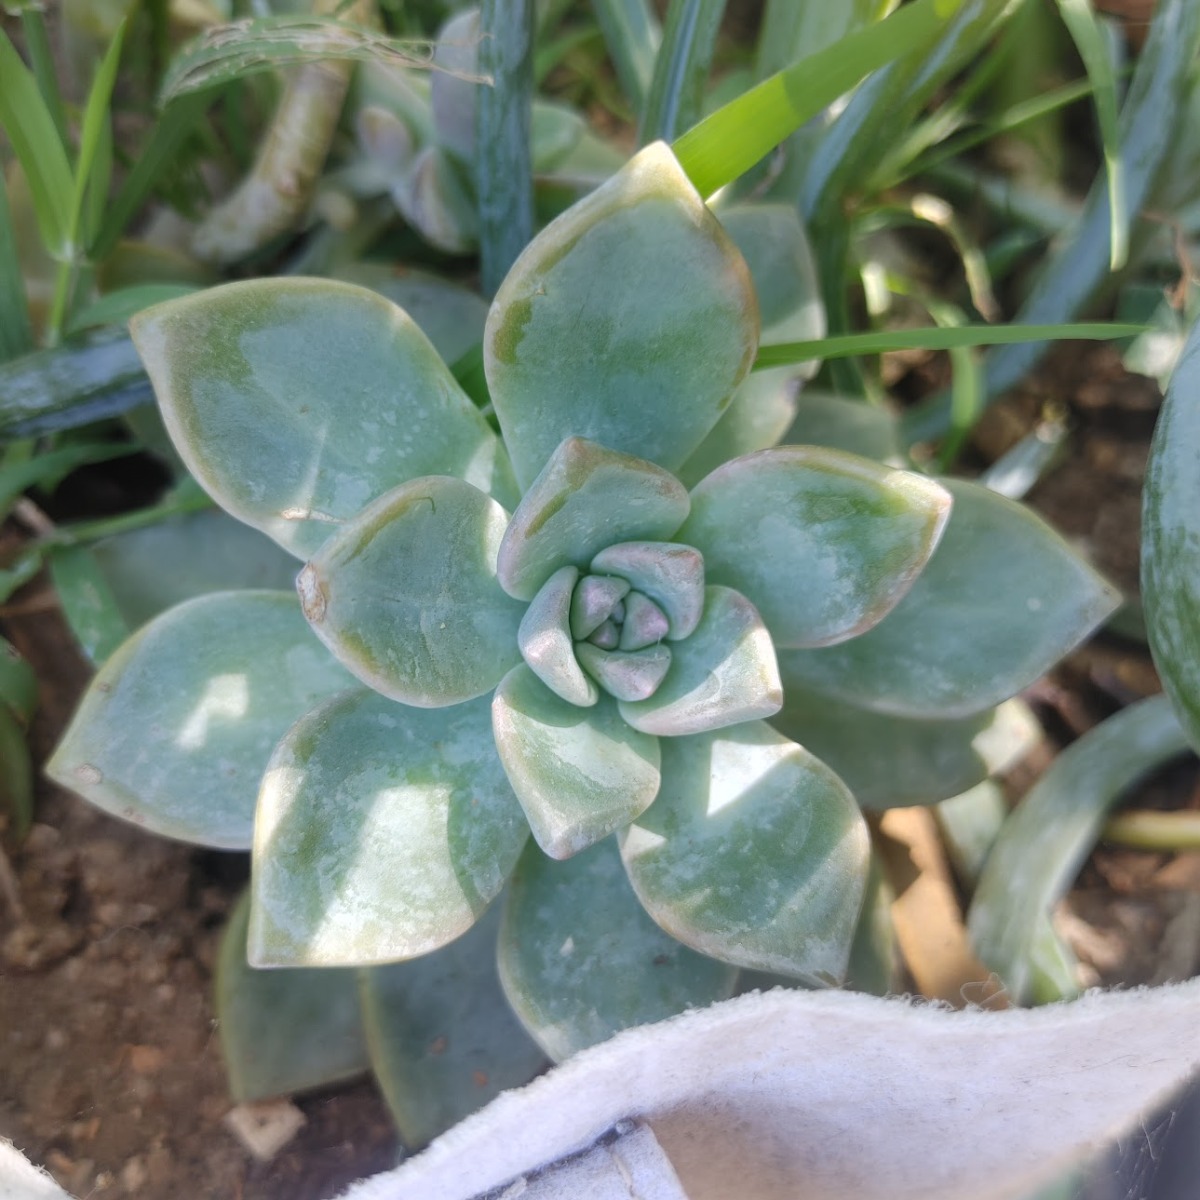 247Garden Baby Ghost Plant "Mother of Pearl" Succulent Starter Live Plant Cutting